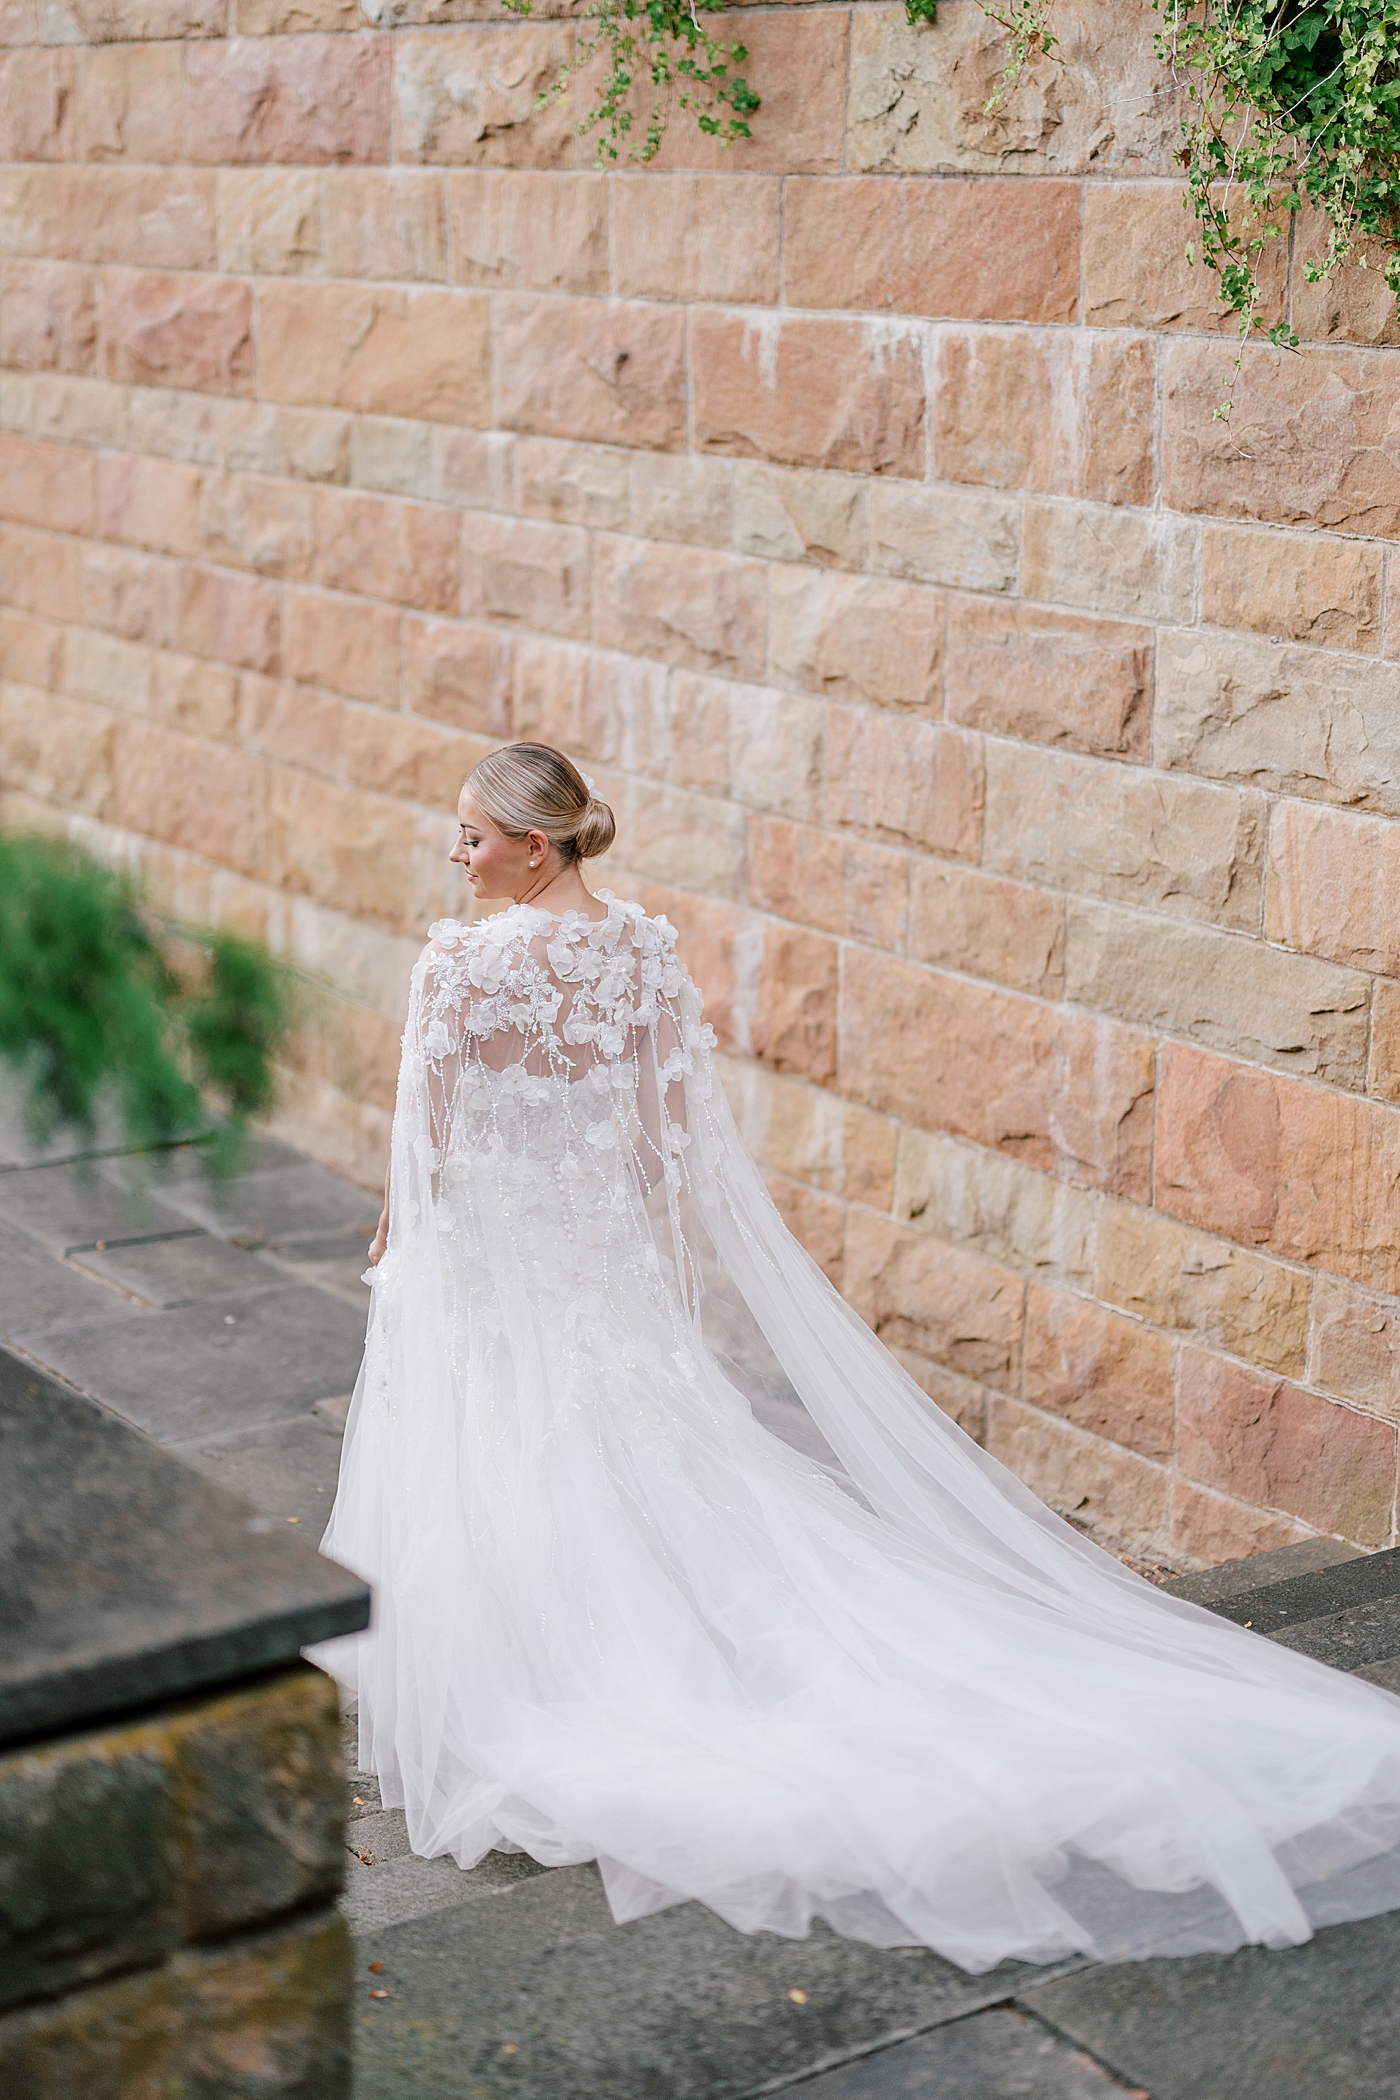 Bride with cape walking down stairs | Image by Hope Helmuth Photography